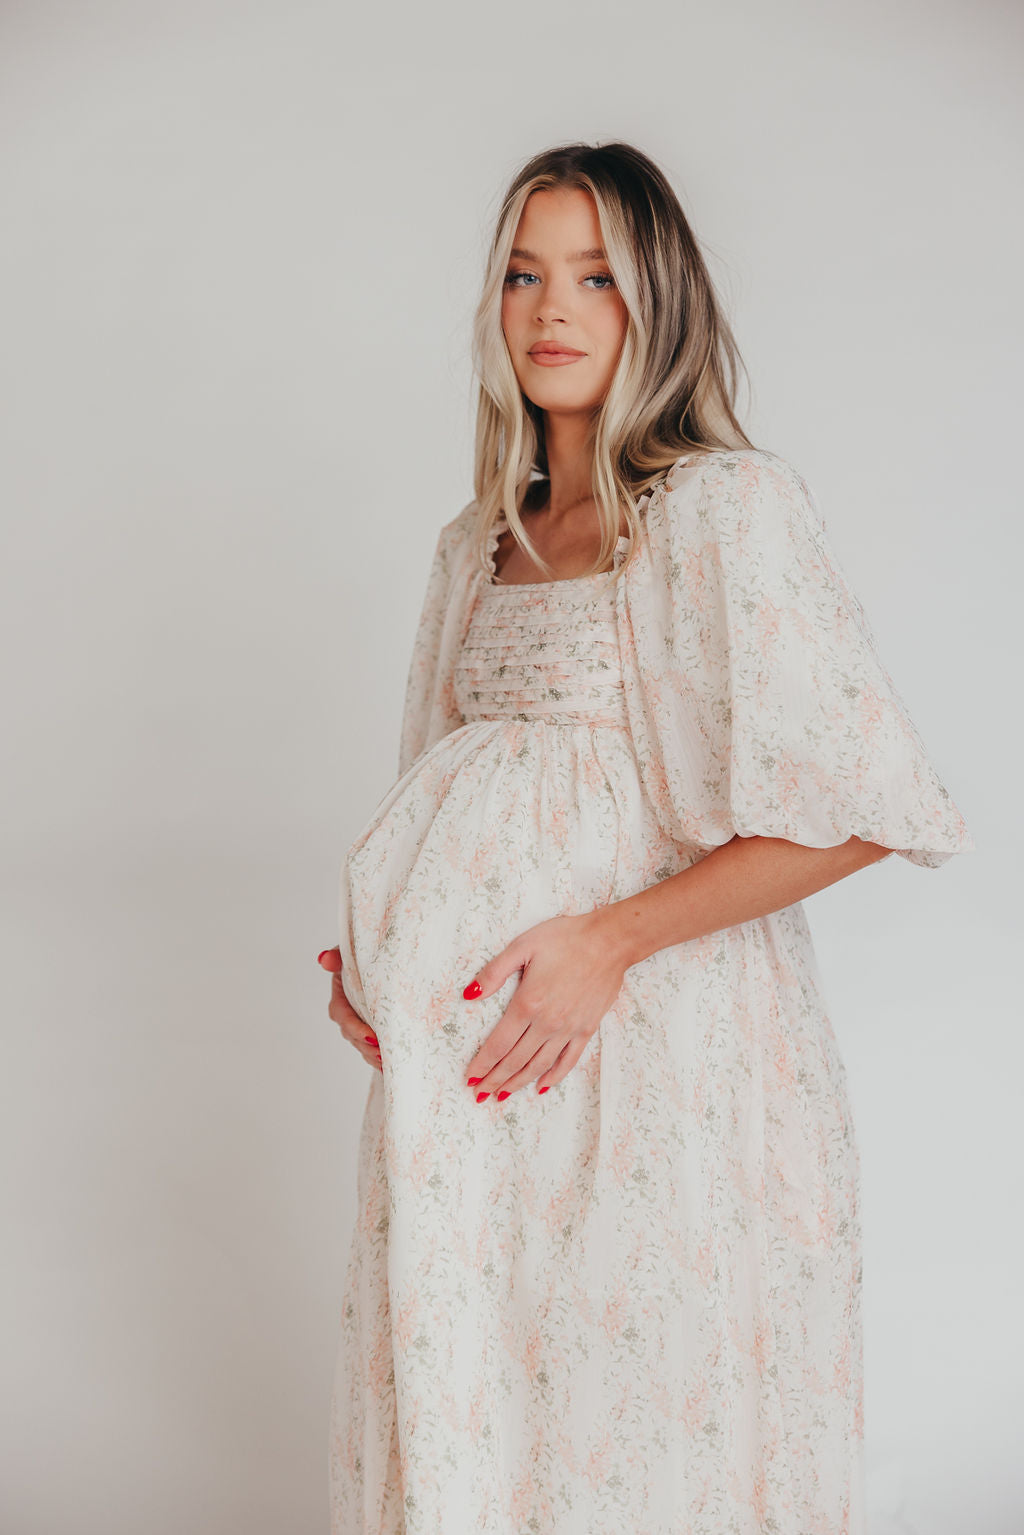 Melody Maxi Dress with Pleats and Bow Detail in Blush Floral - Bump Friendly & Inclusive Sizing (S-3XL)